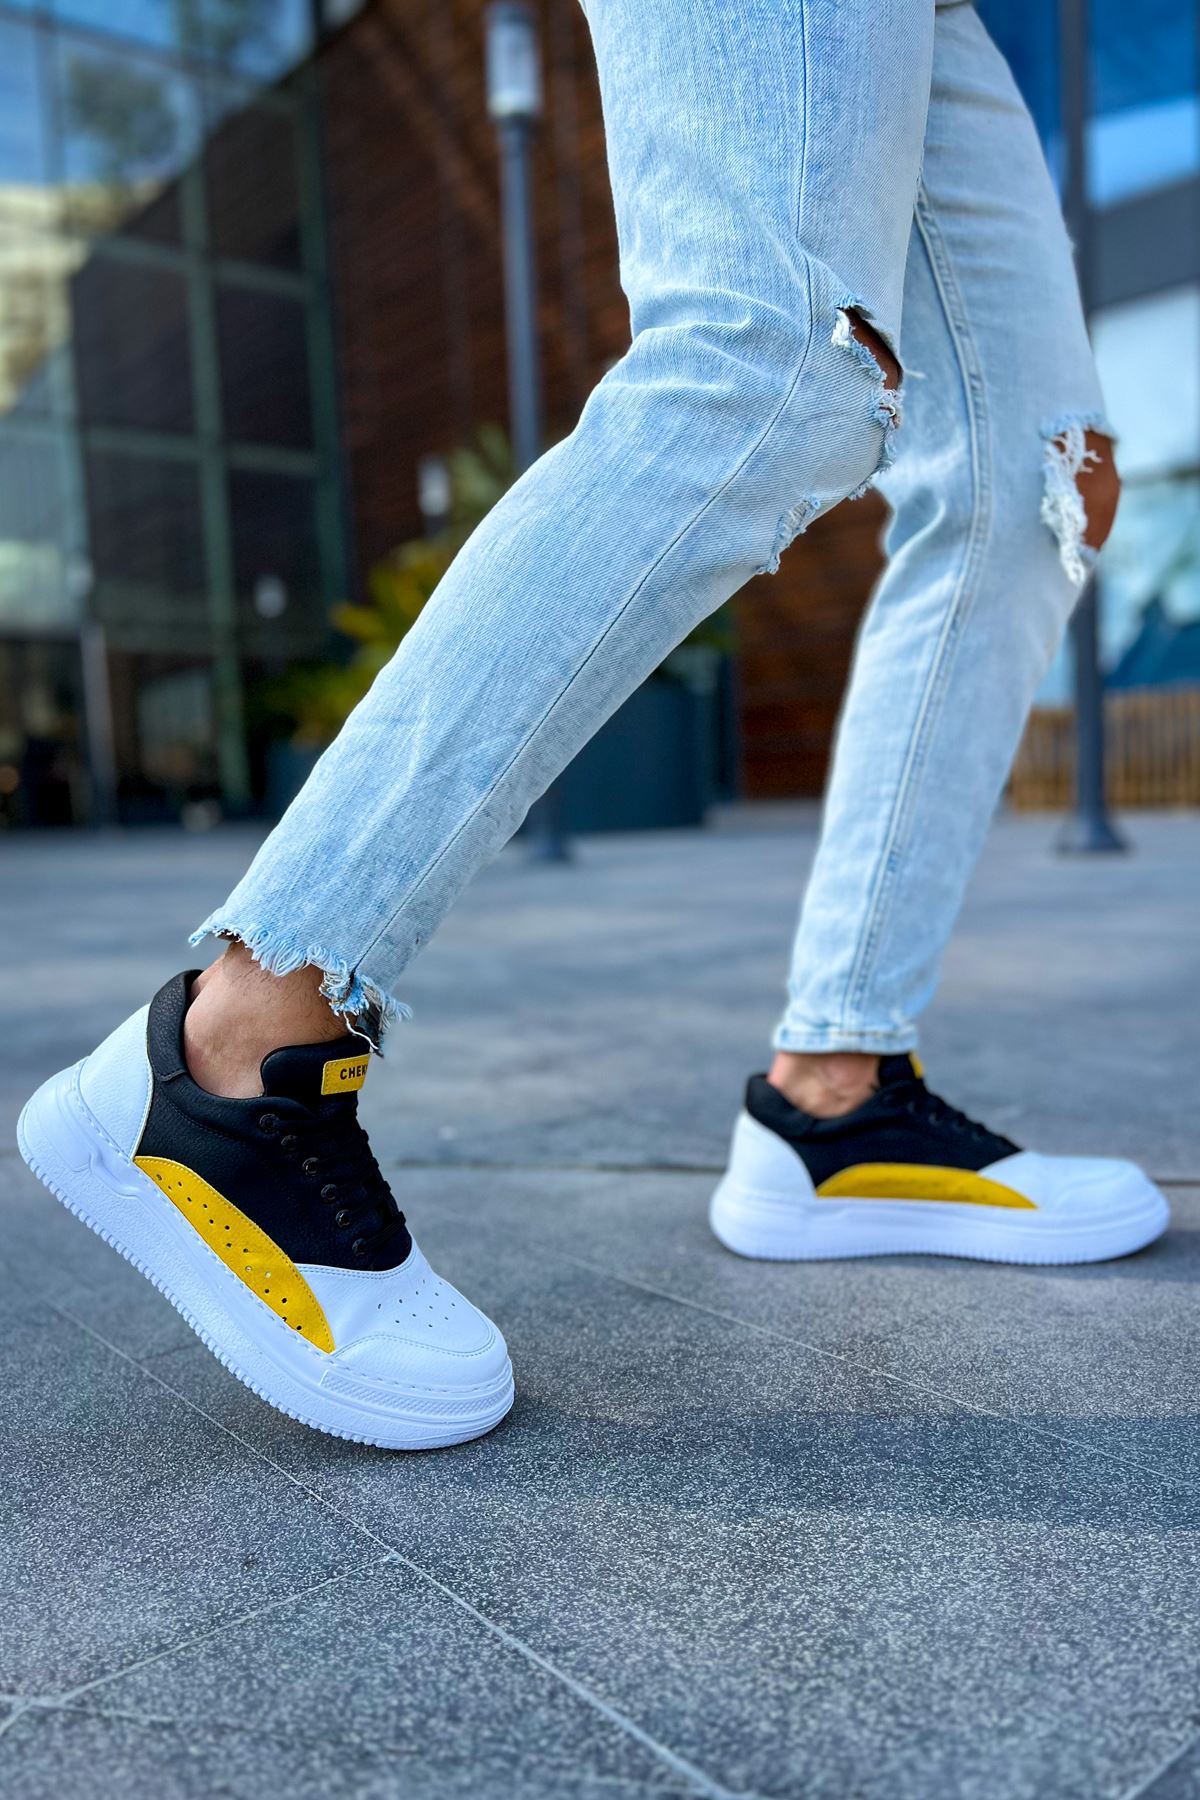 CH115 WS Men's Shoes WHITE / YELLOW / BLACK - STREETMODE ™